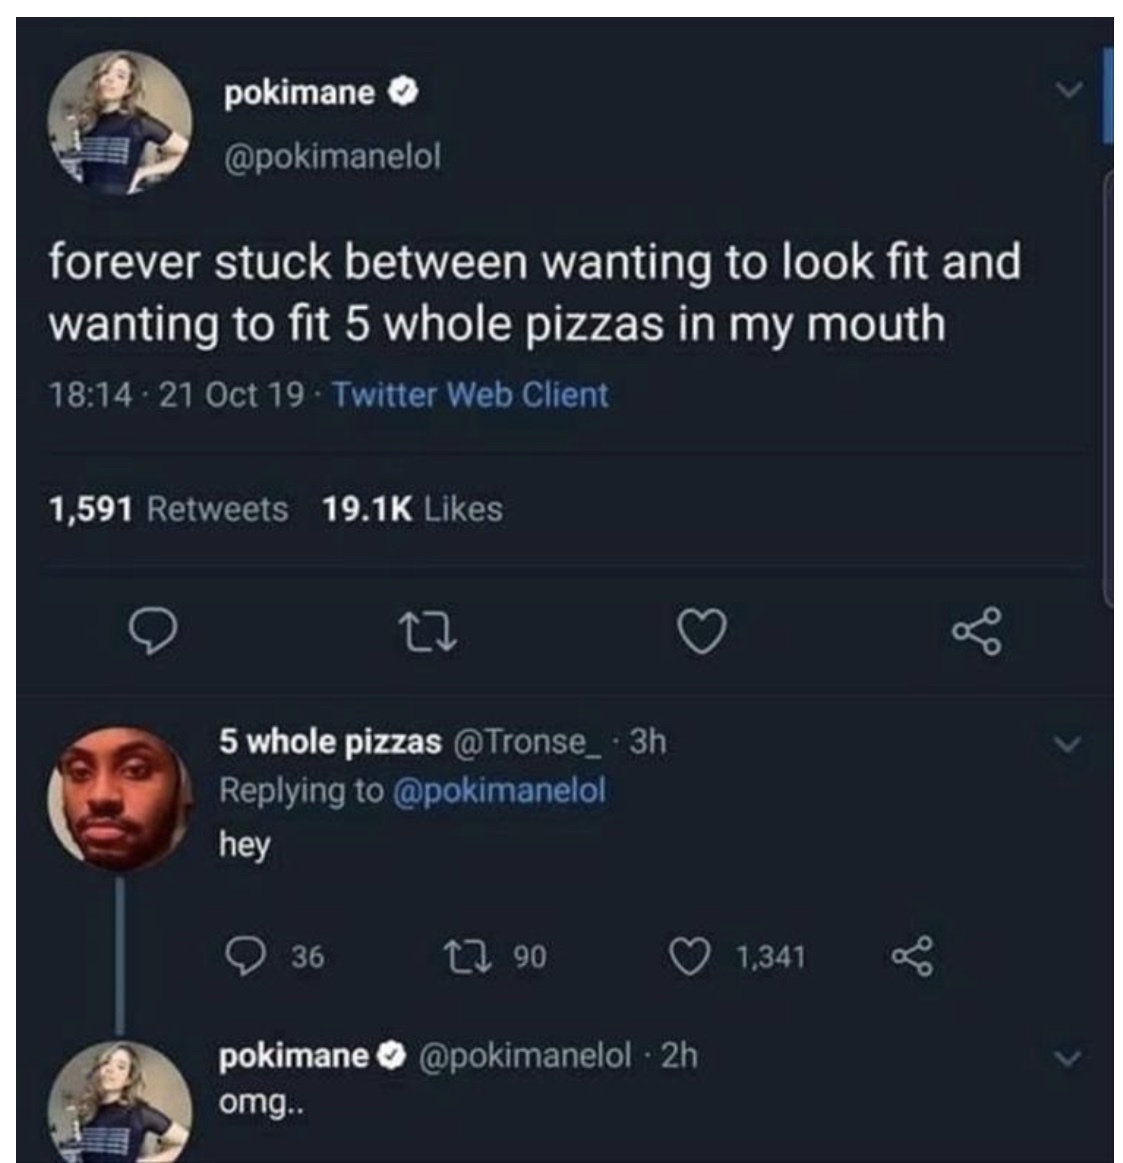 pokimane carson - pokimane forever stuck between wanting to look fit and wanting to fit 5 whole pizzas in my mouth . 21 Oct 19. Twitter Web Client 1,591 27 5 whole pizzas @ Tronse_ 3h hey 36 12 90 1,341 pokimane . 2h omg..